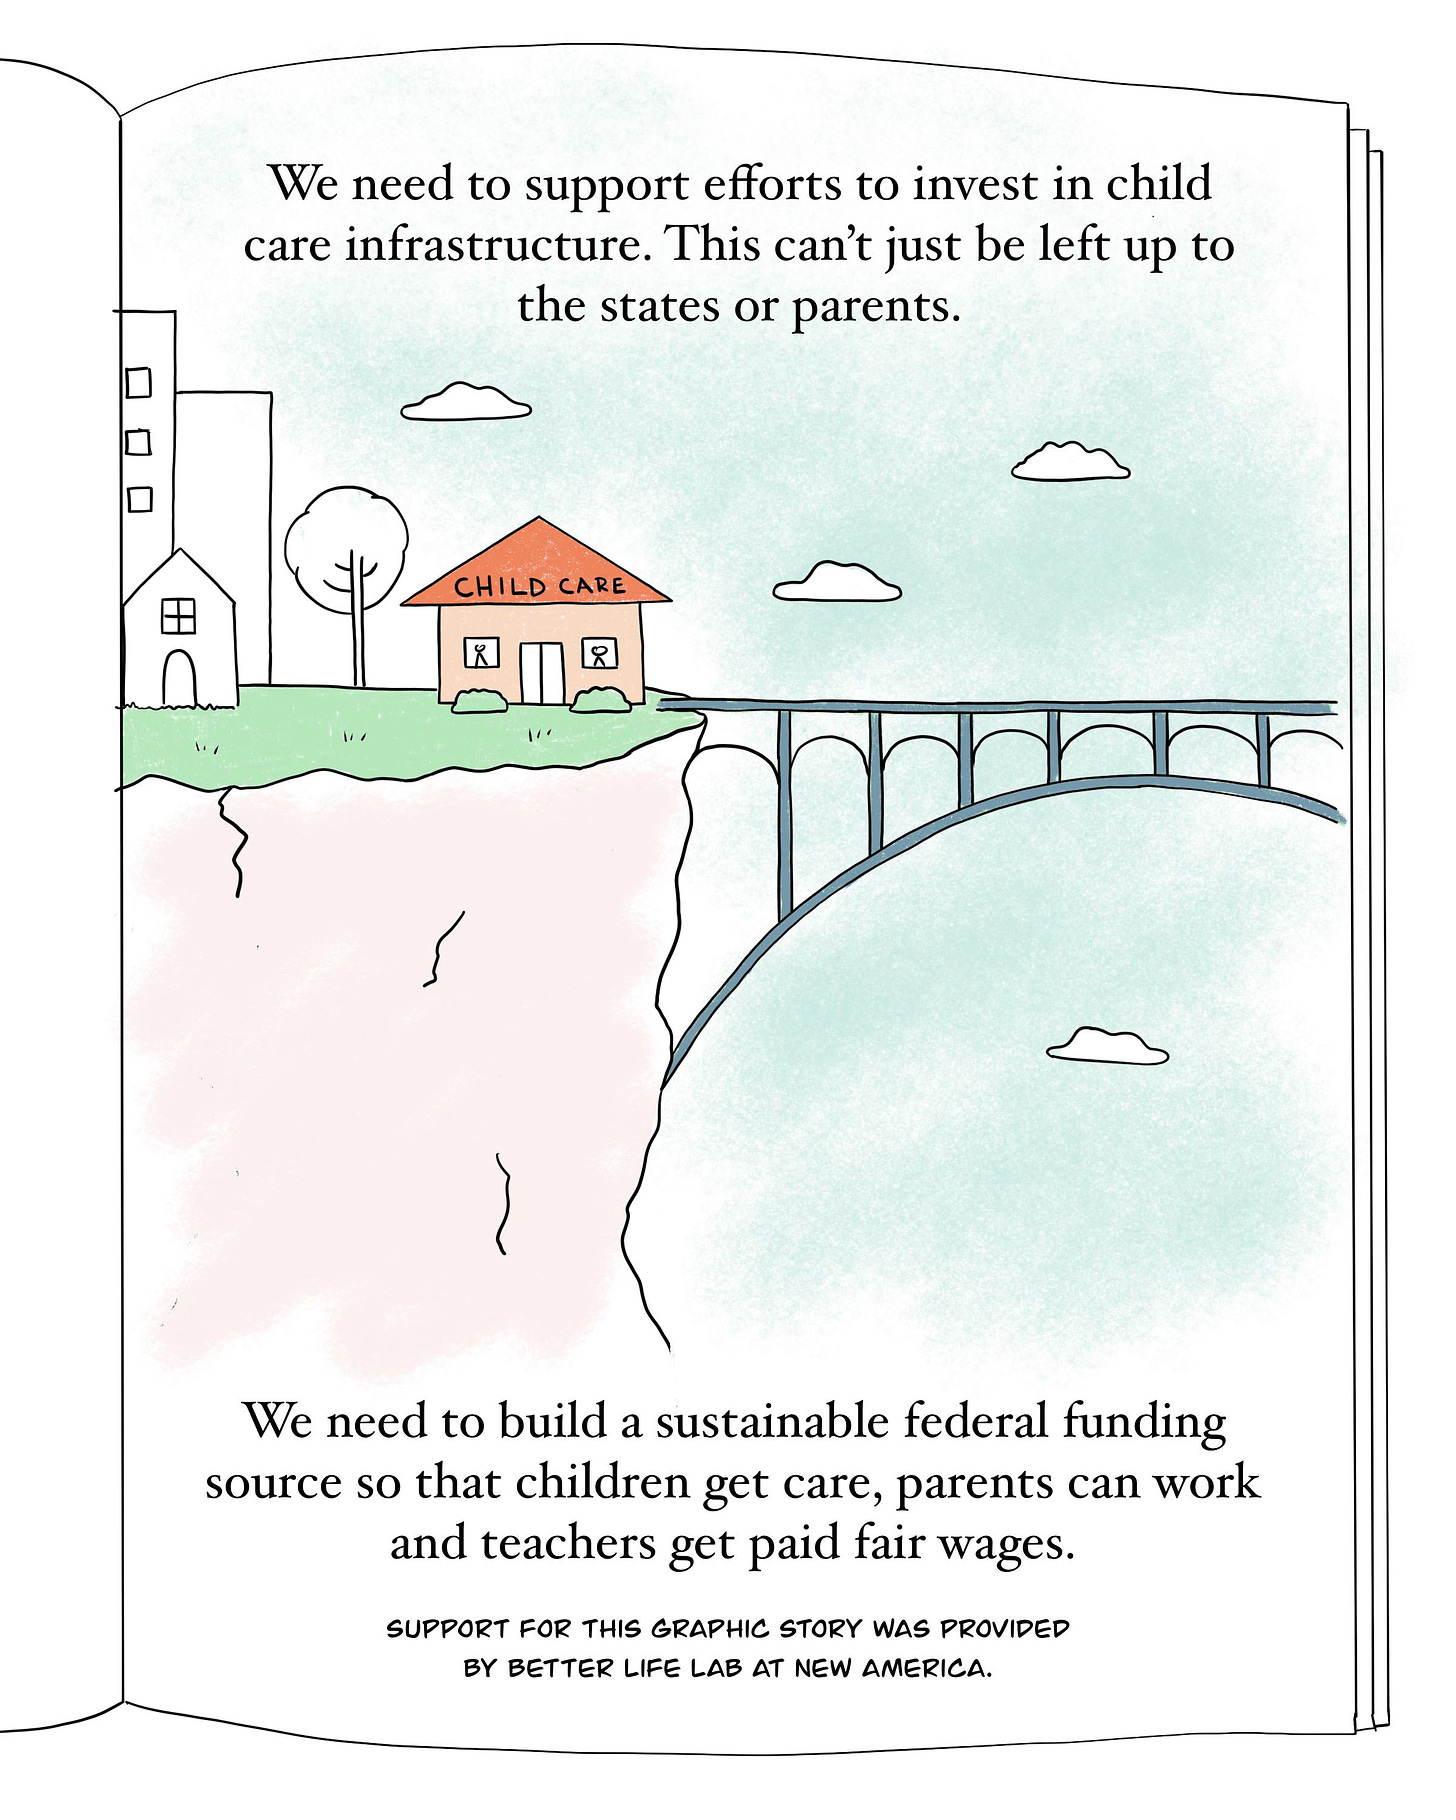 A child care center at the edge of a cliff but with a bridge built to support it. The text reads:  We need to support efforts to invest in child care infrastructure. This can't just be left up to the states or parents.  We need to build a sustainable federal funding source so that children get care, parents can work and teachers get paid fair wages.  Support for this graphic story was provided by the Better Life Lab at New America.